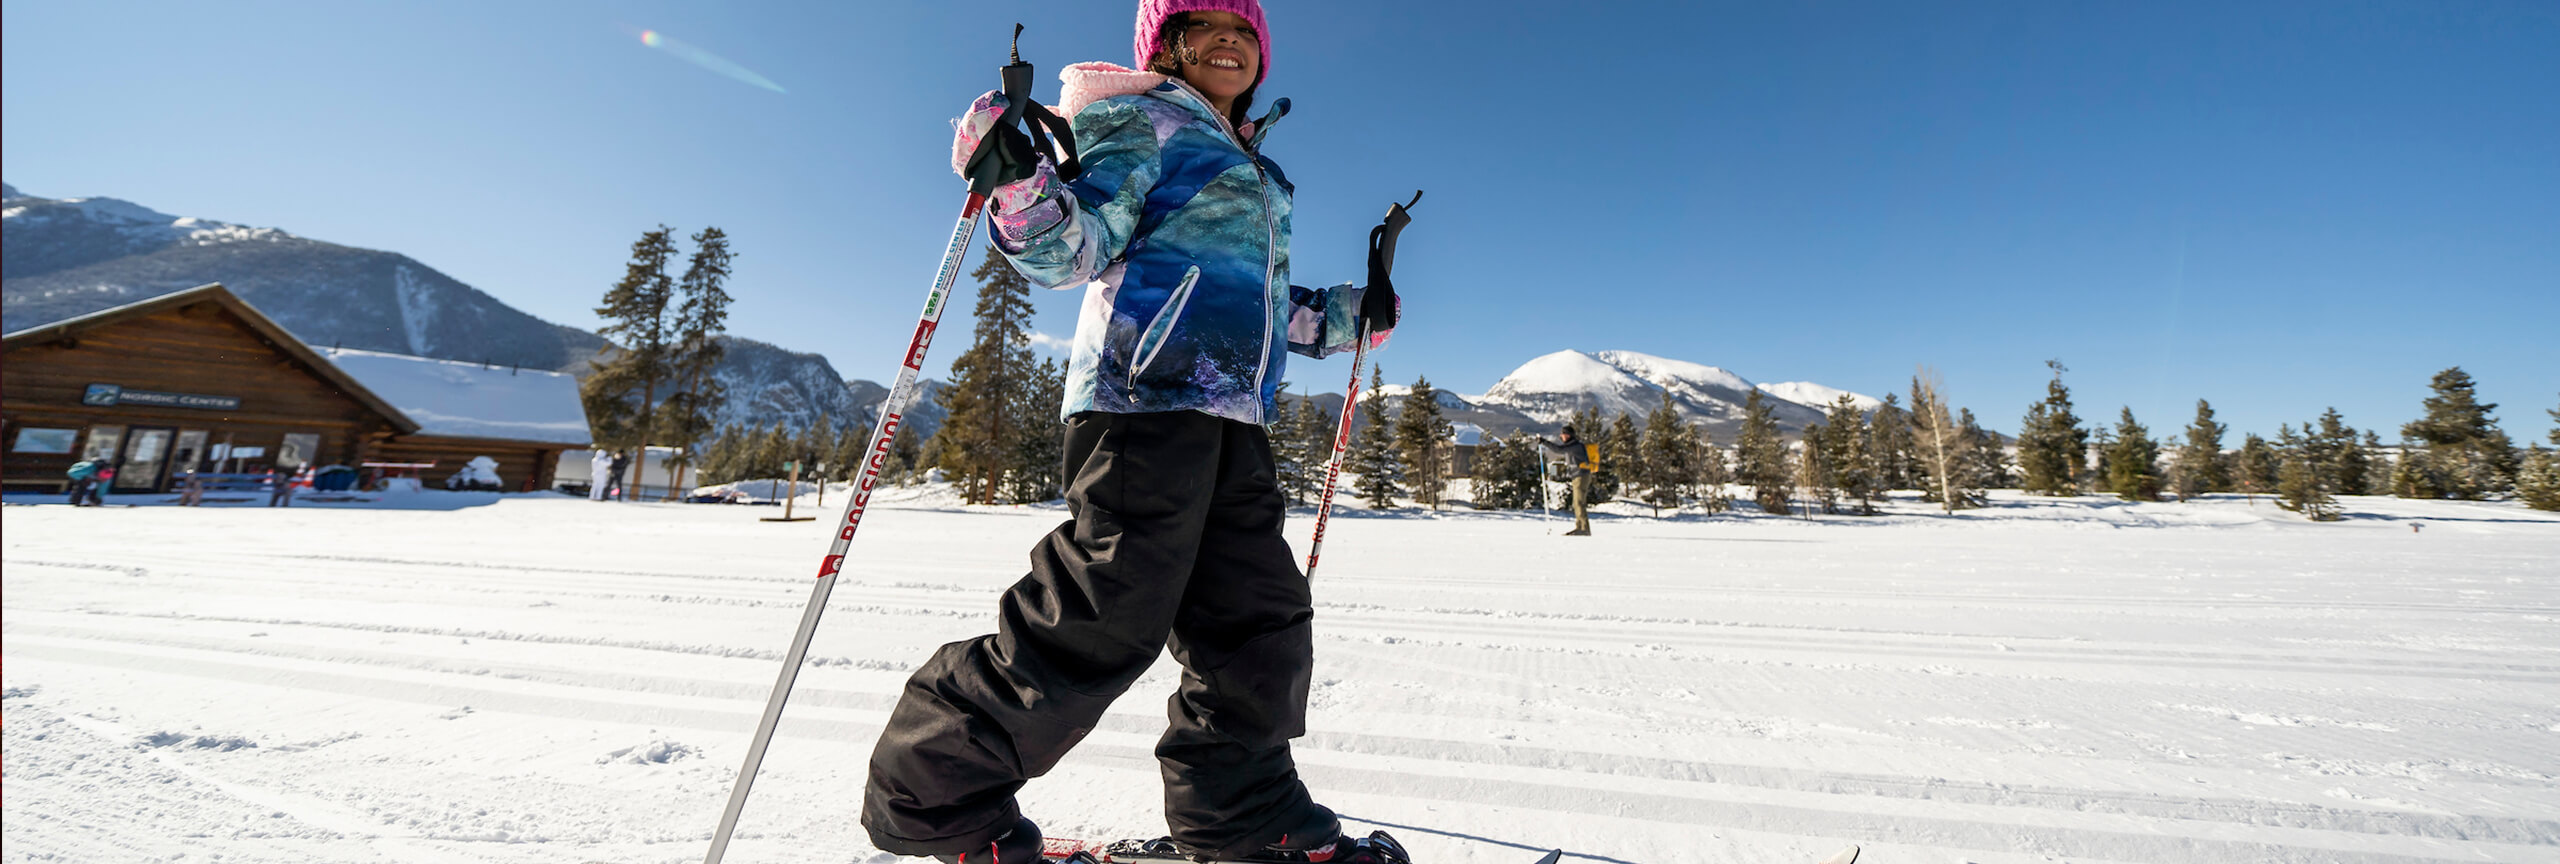 Child cross-country skiing at the Frisco Nordic Center